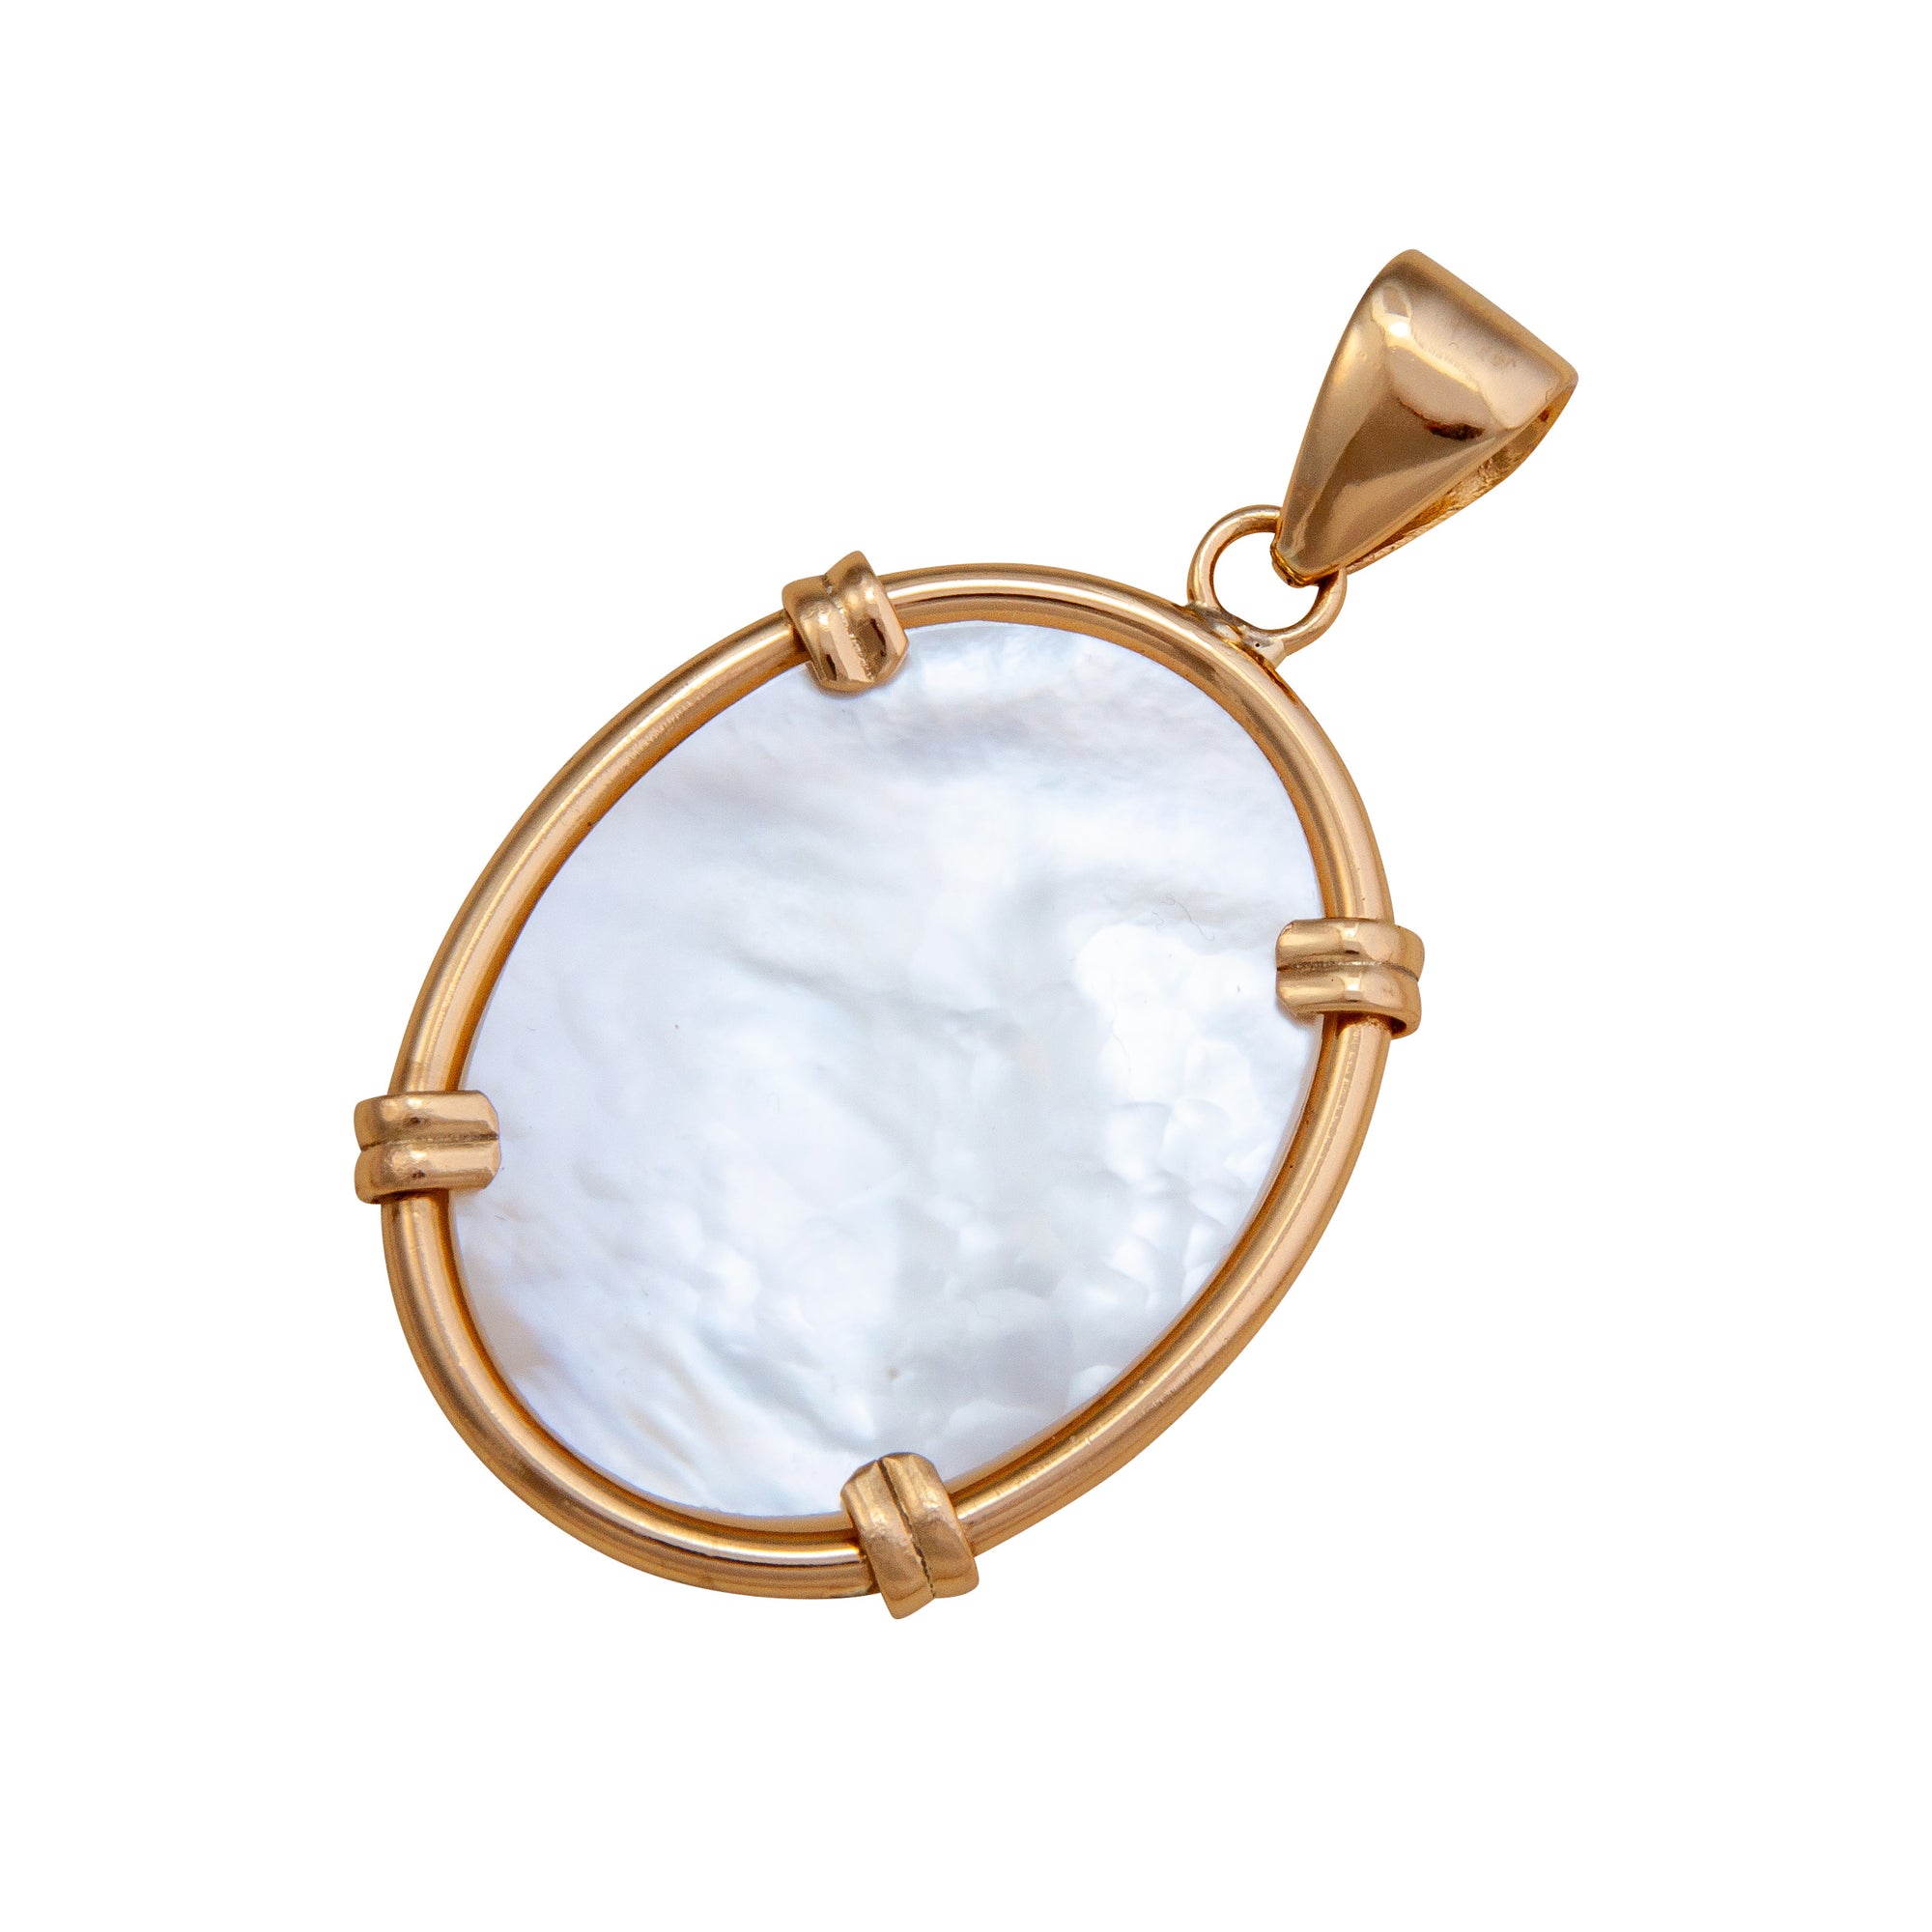 Alchemia Mother of Pearl Oval Prong Set Pendant | Charles Albert Jewelry